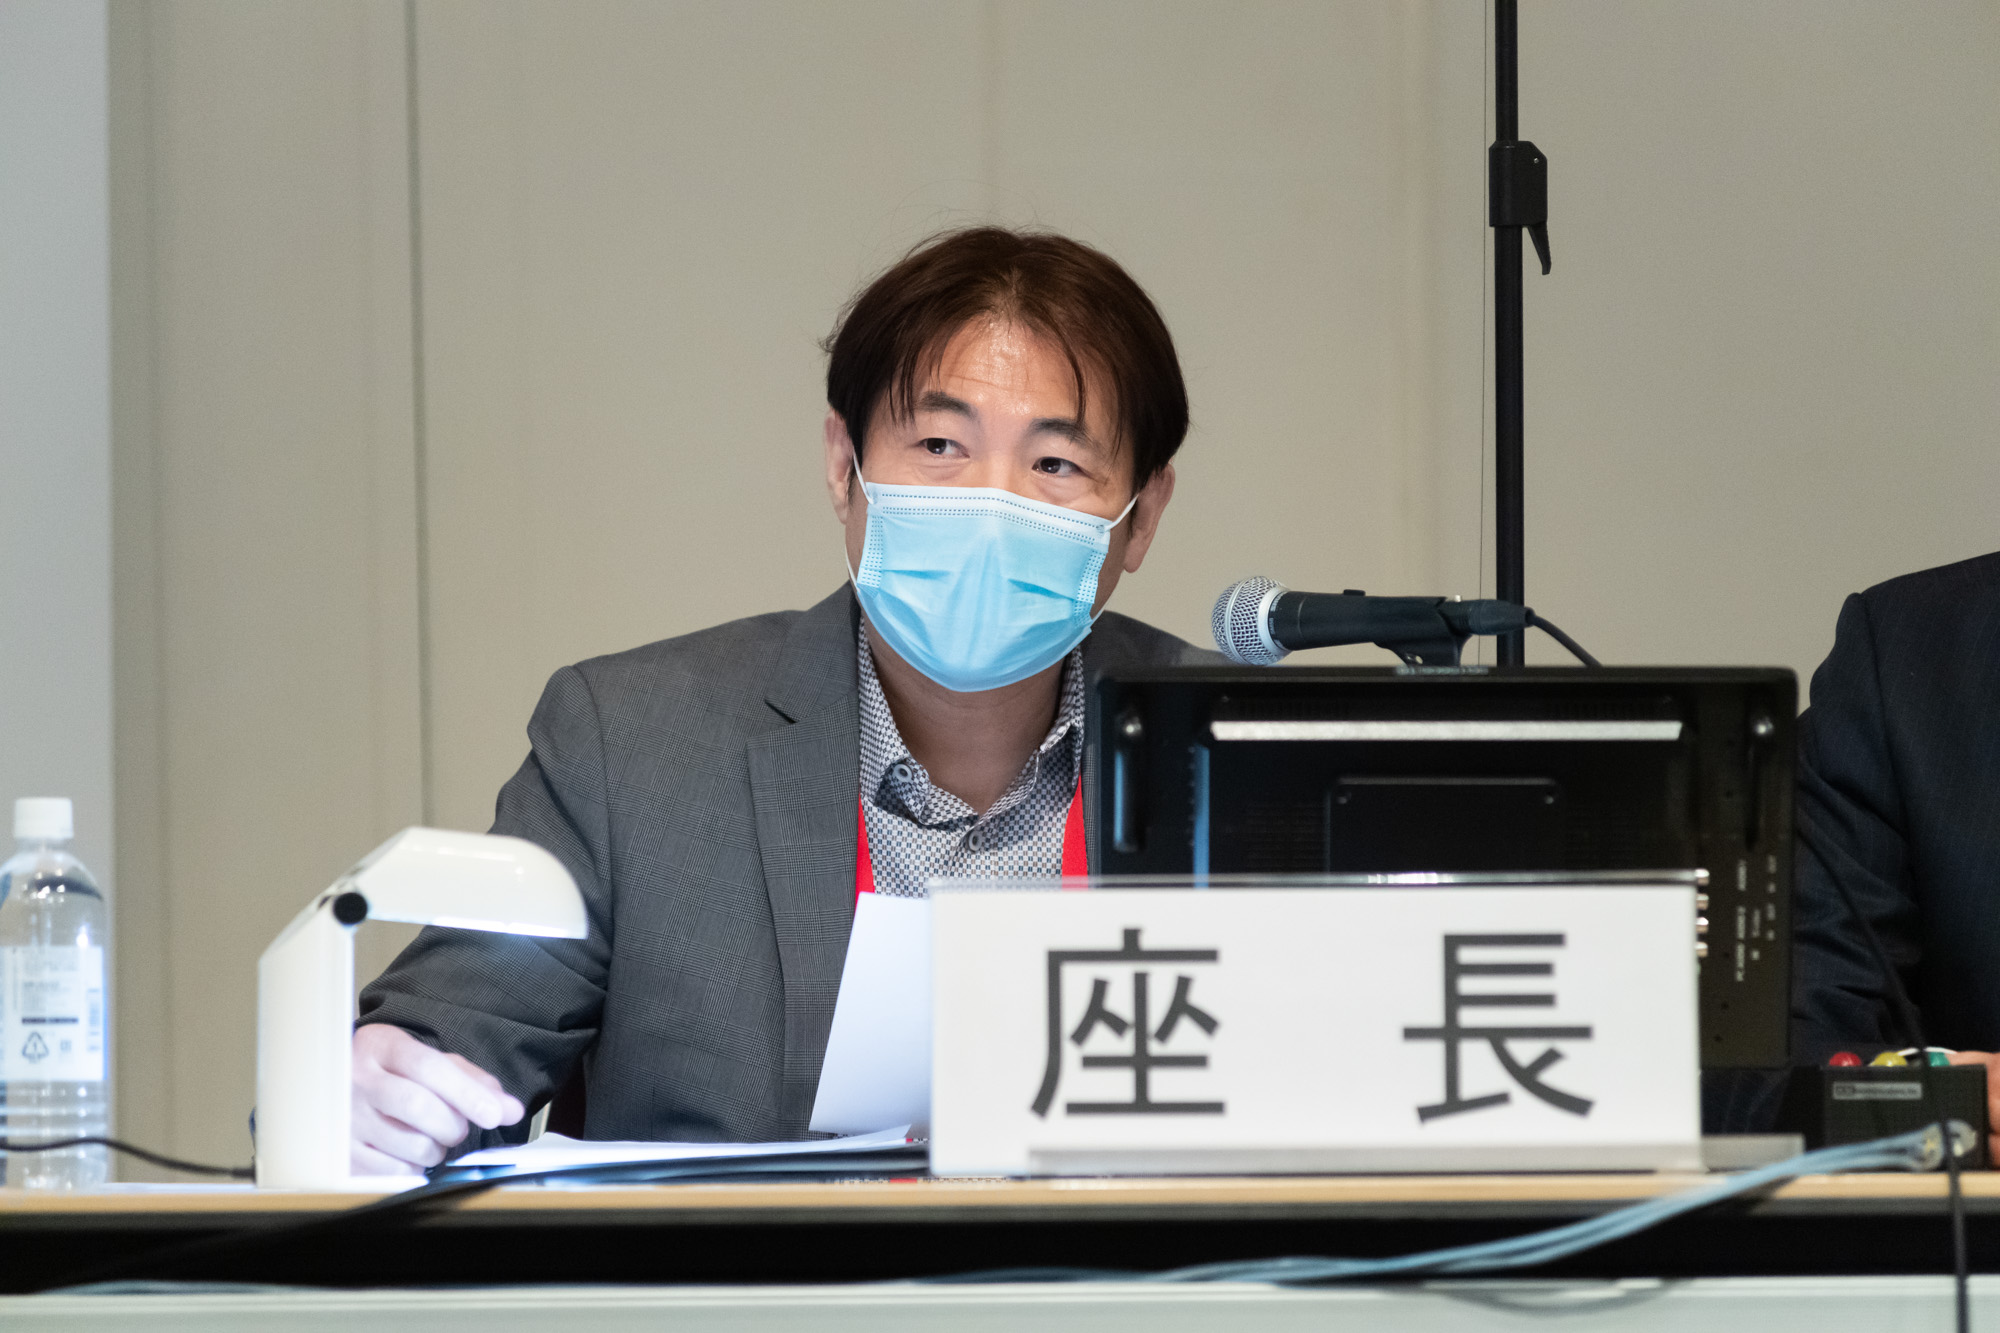 Dr. Suzuki serves as session chair at JRS